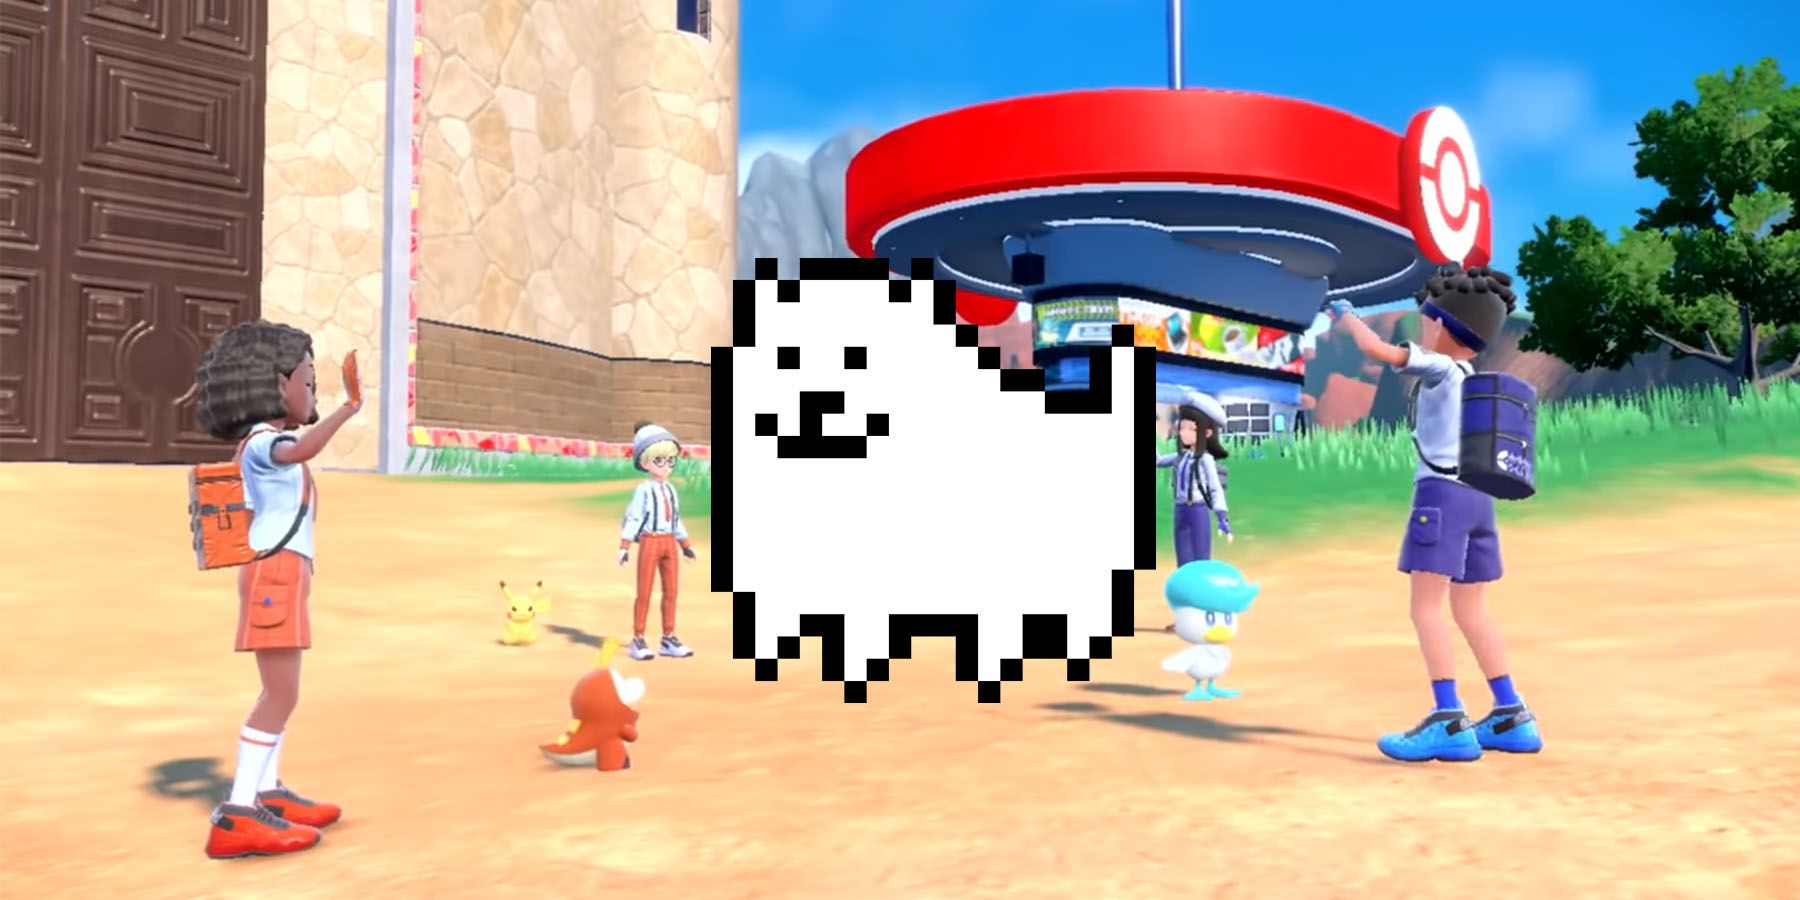 Undertale's Toby Fox has songs in Pokémon Scarlet and Violet - Polygon